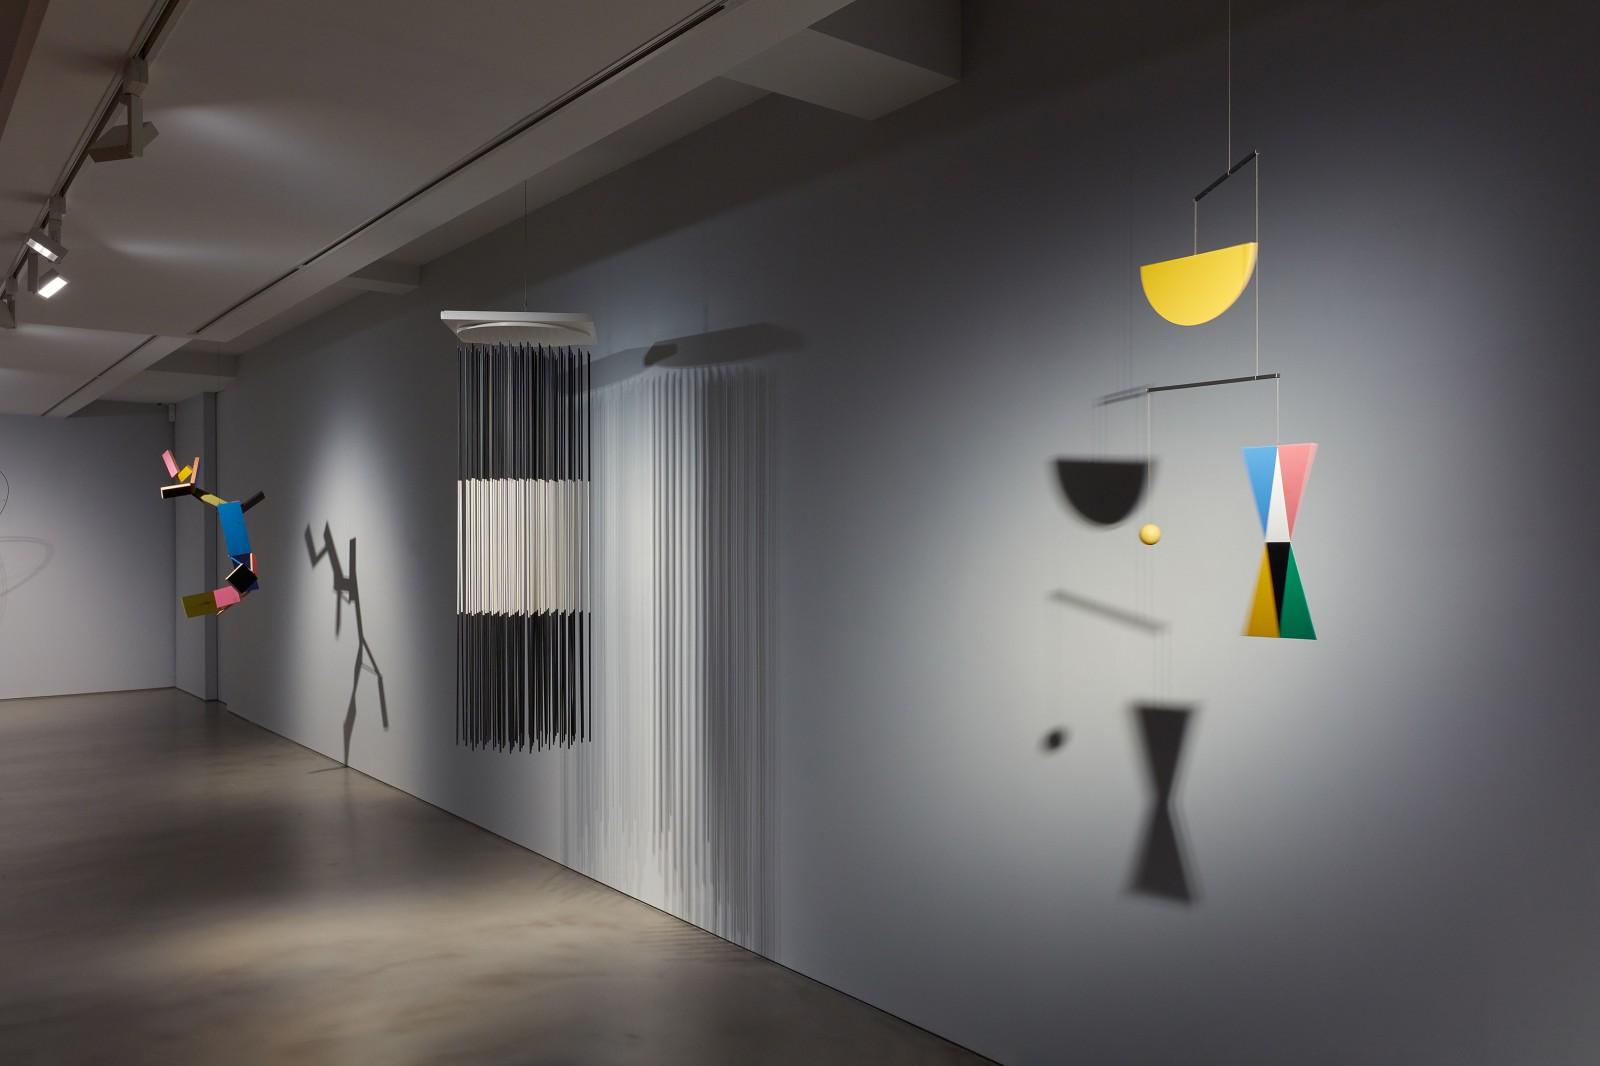 View of the exhibition "Suspension - A History of Abstract Hanging Sculpture. 1918 – 2018", Galerie Olivier Malingue, London, 2018 (S 37)